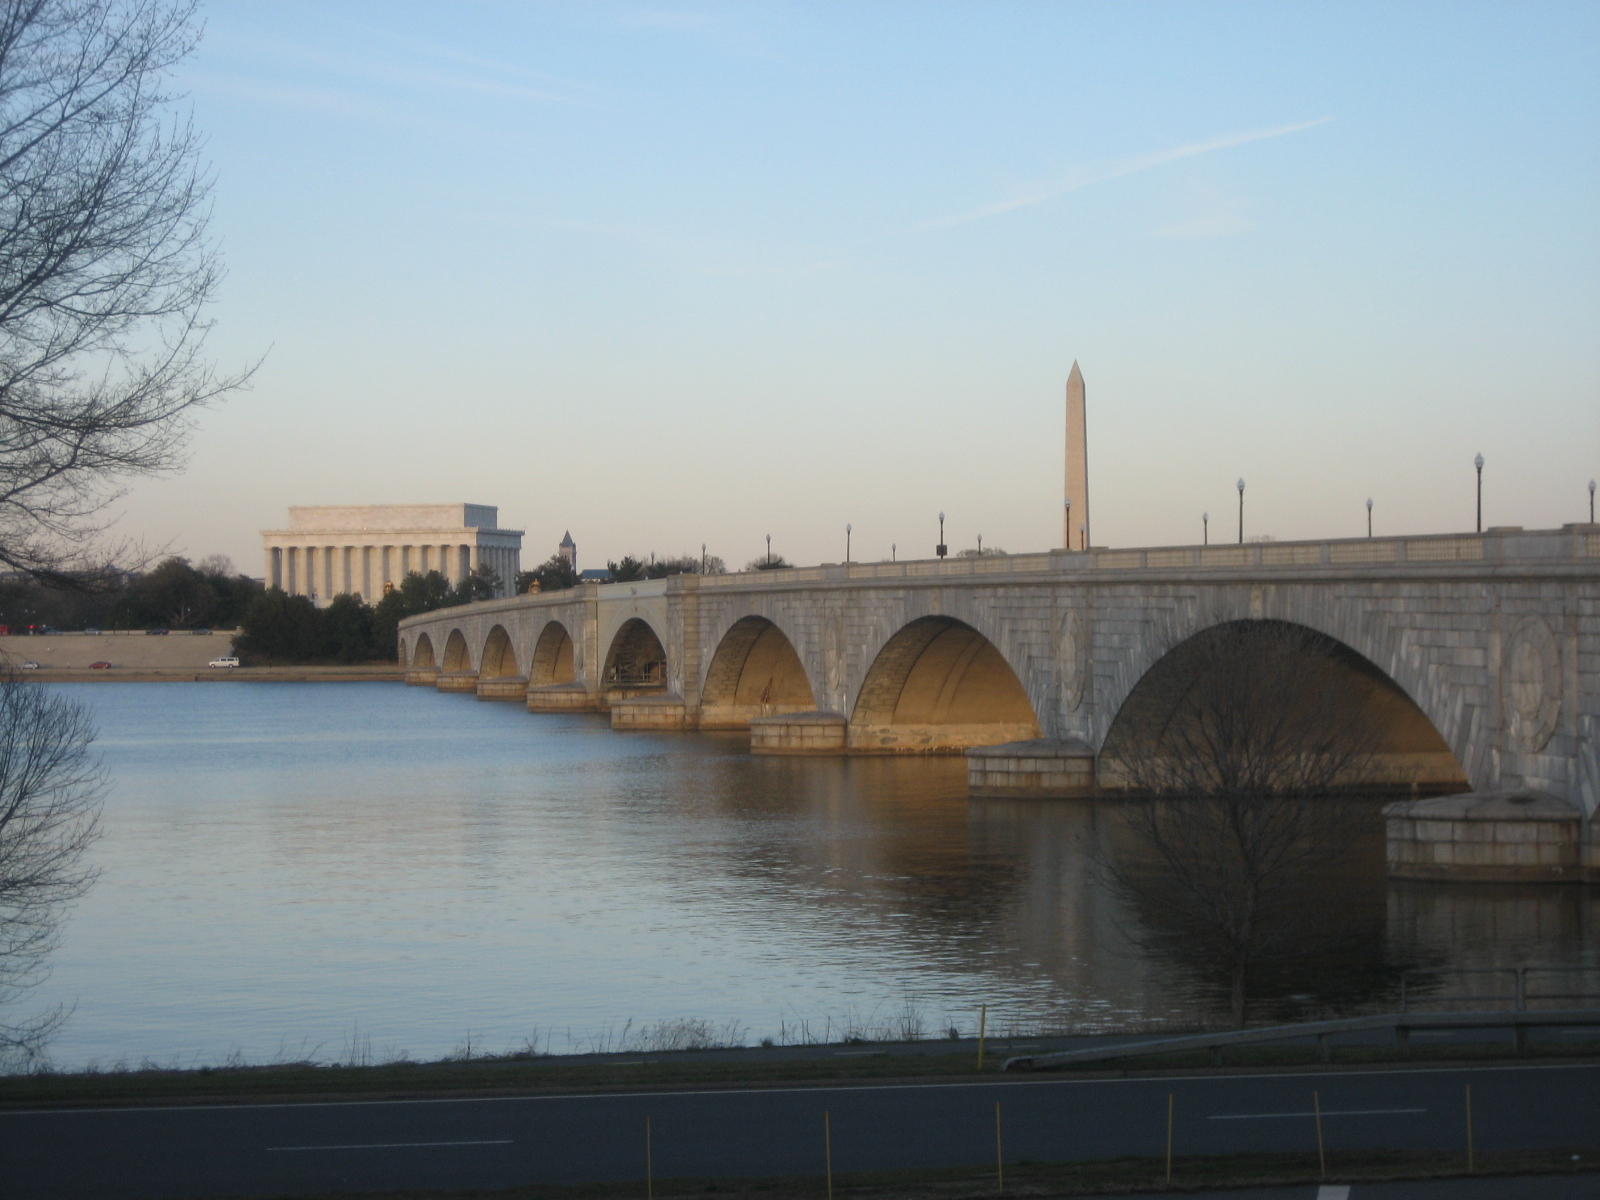 Lincoln and Washington Memorials and Memorial Bridge in the foreground